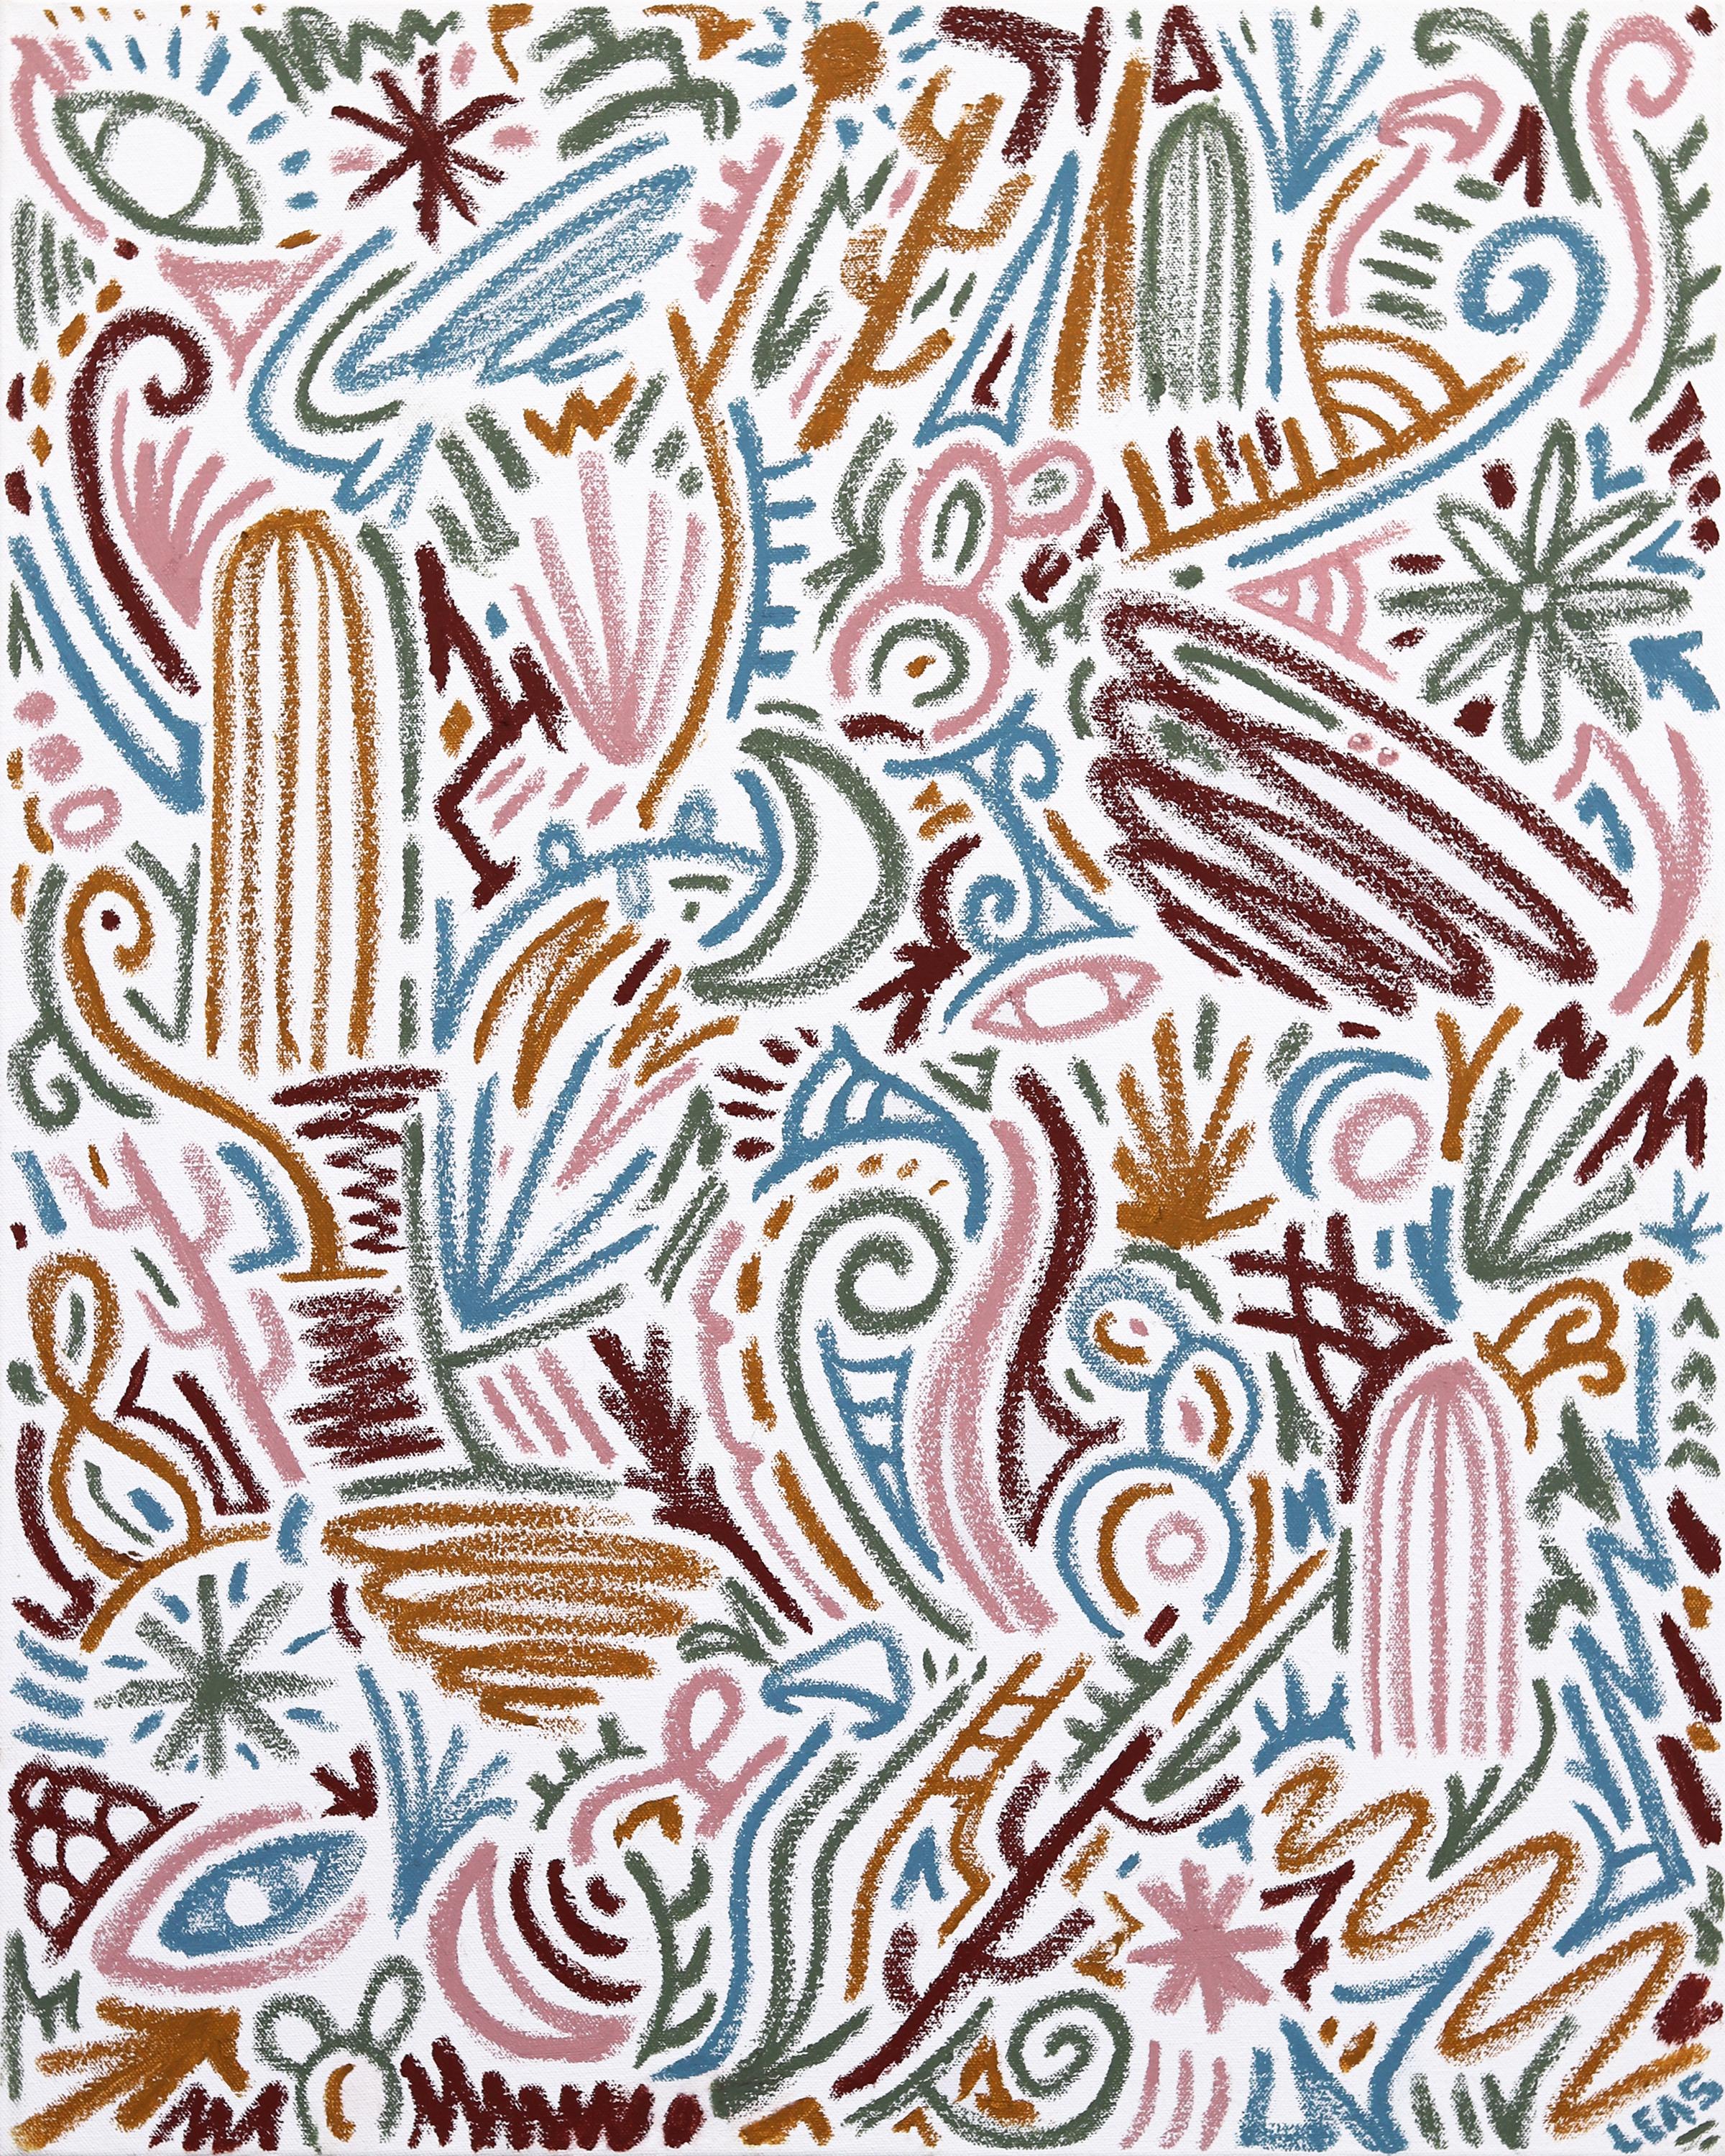 Aerial Magic - Dynamic Linear Design Composition Aboriginal Inspired Painting